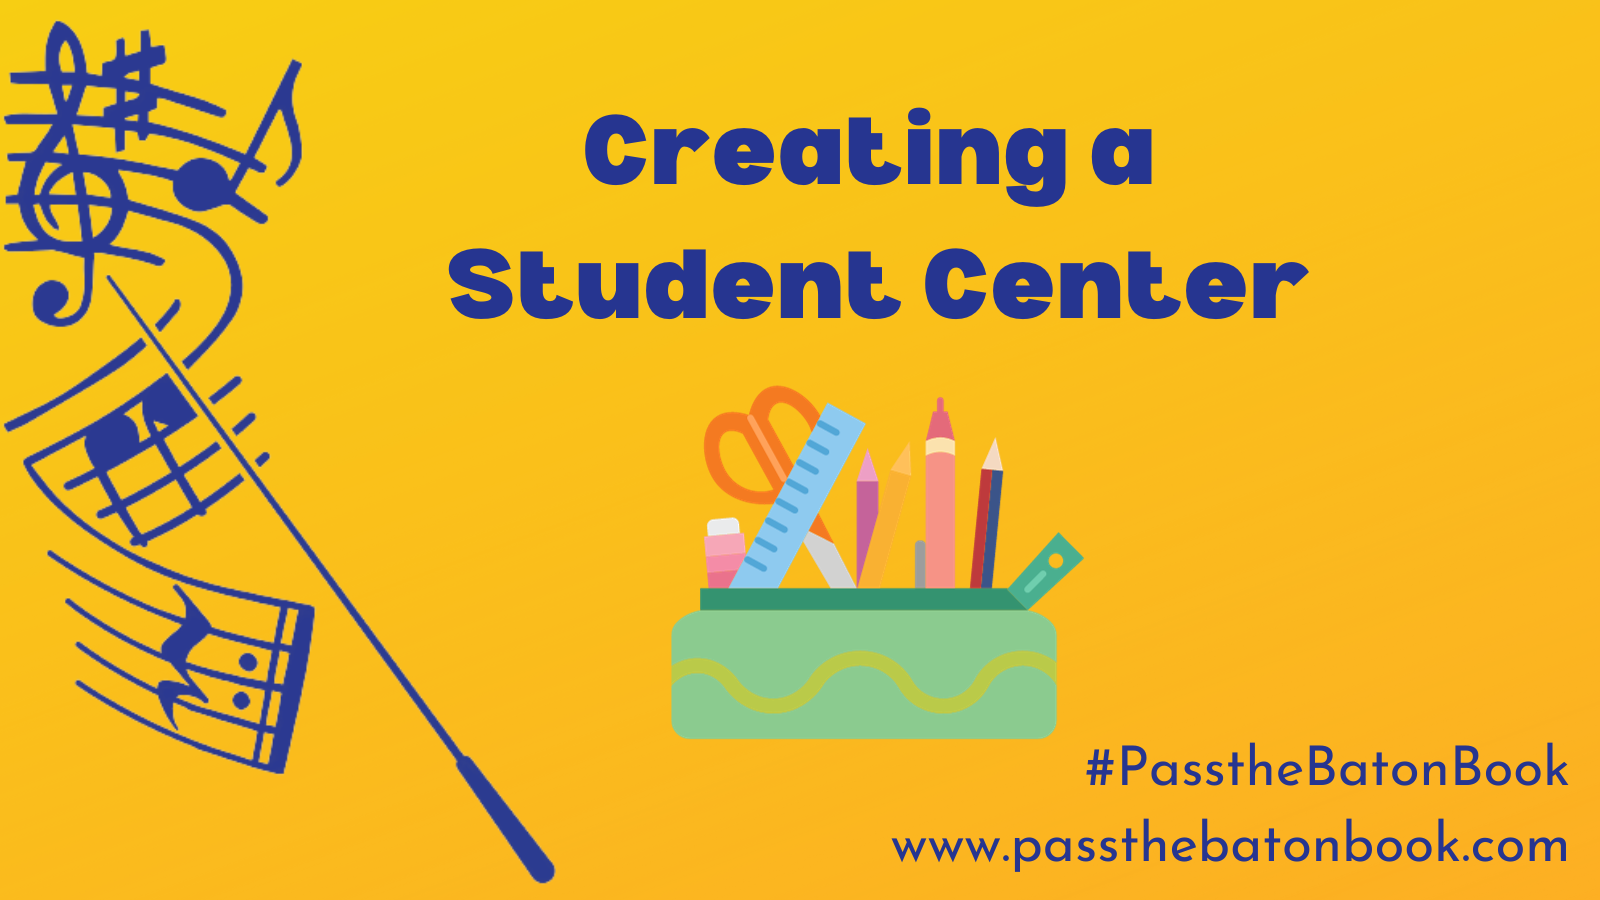 Creating a student center